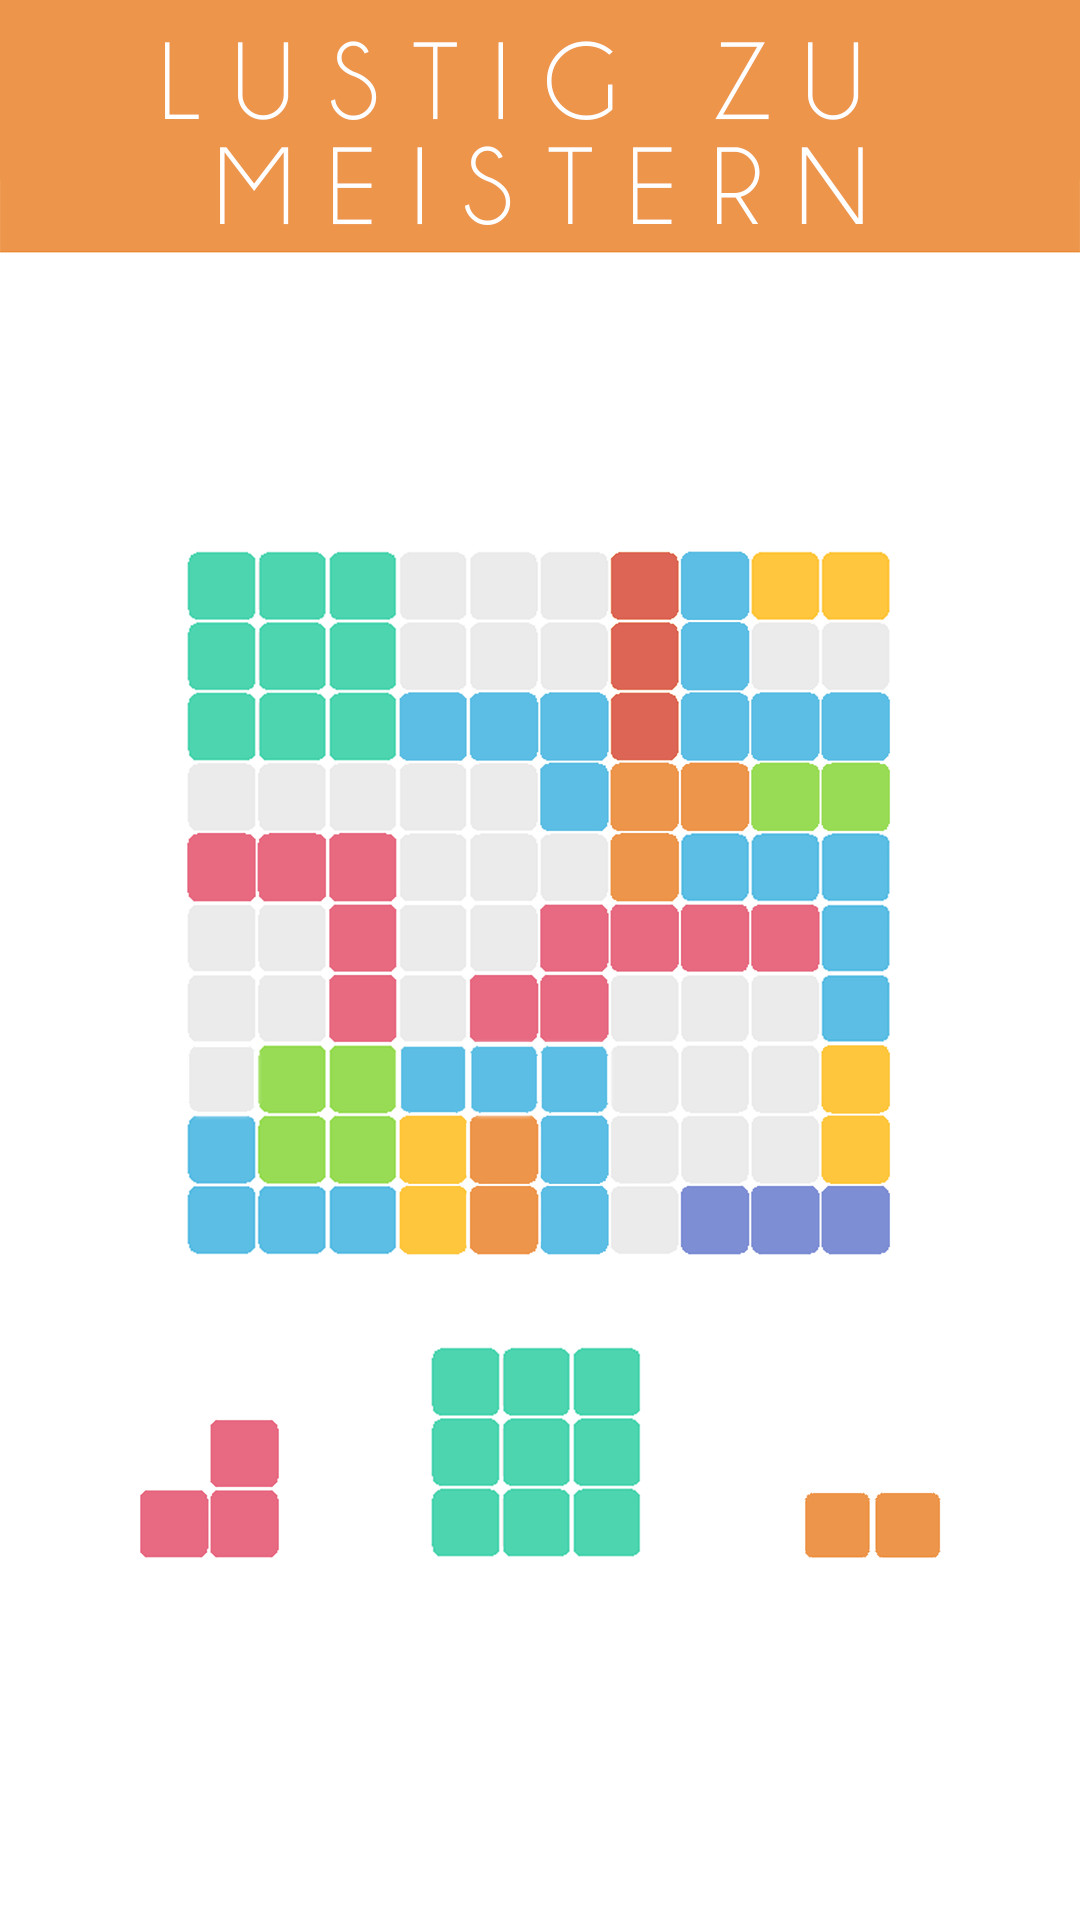 Android application 1010! Block Puzzle Game screenshort